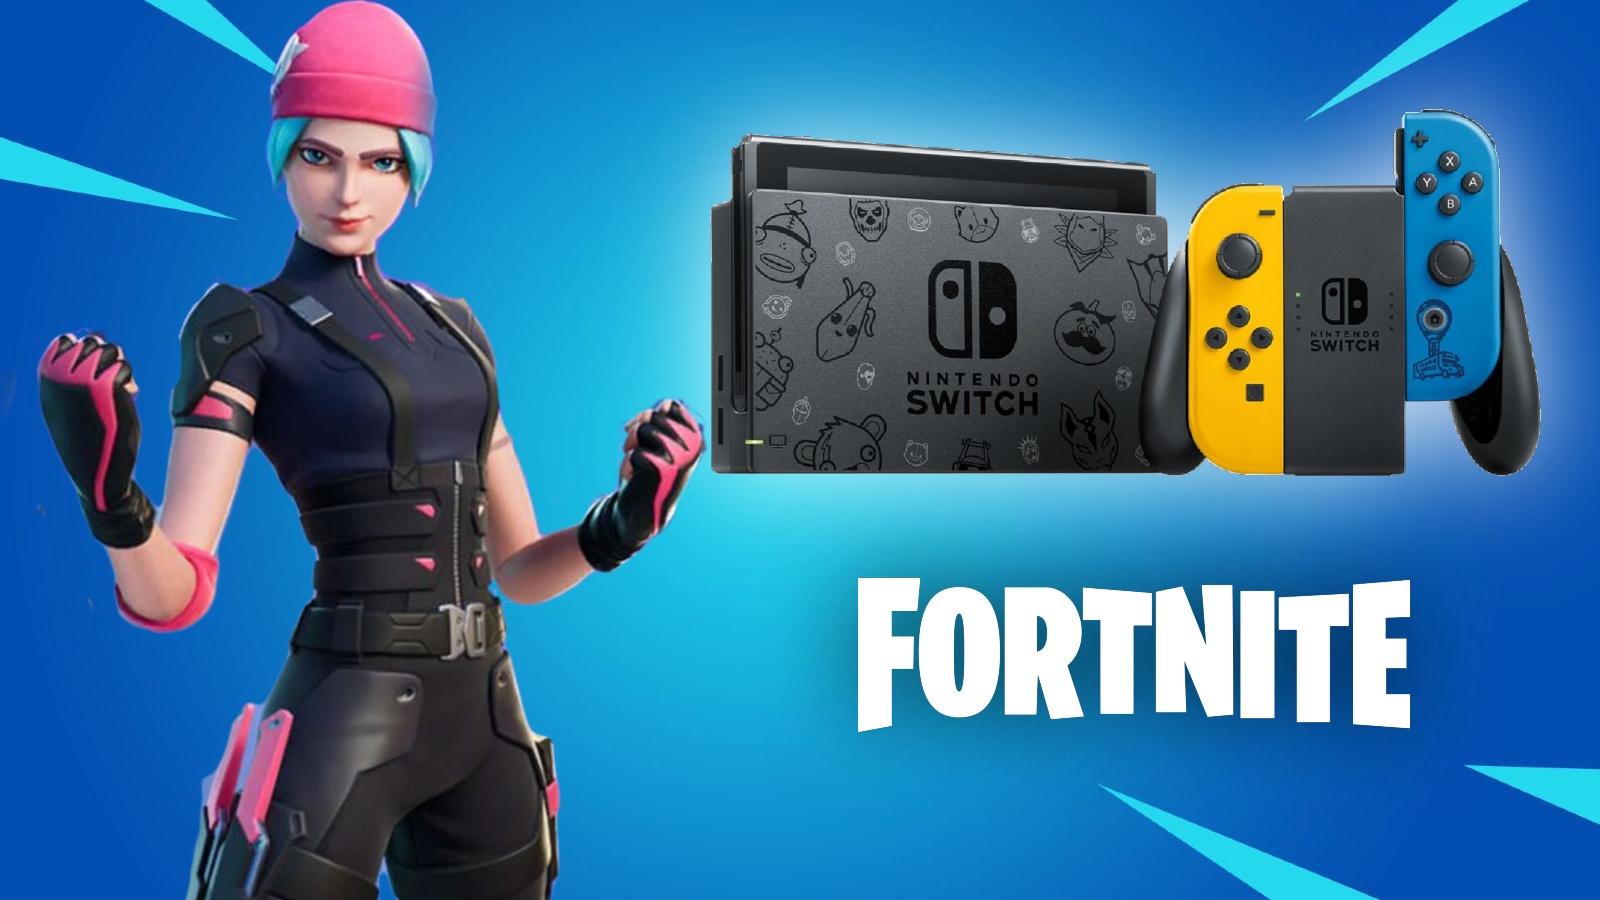 Nintendo Switch Fortnite Wildcat Bundle Console Limited Edition - BRAND NEW